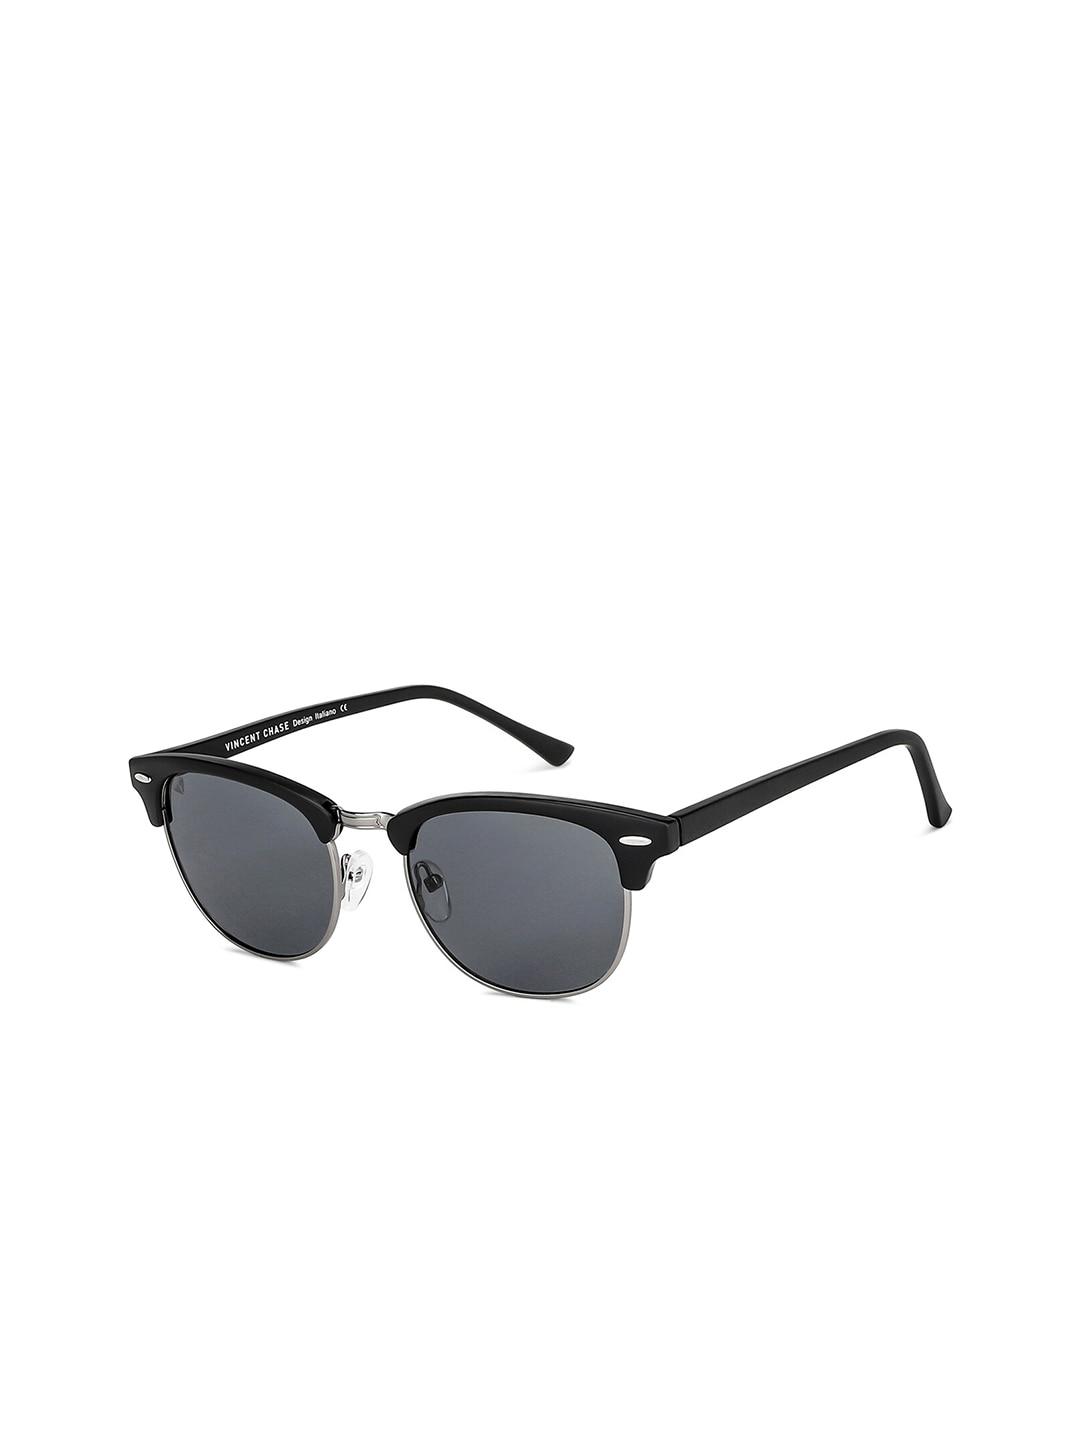 vincent chase unisex grey lens & black browline sunglasses with polarised and uv protected lens